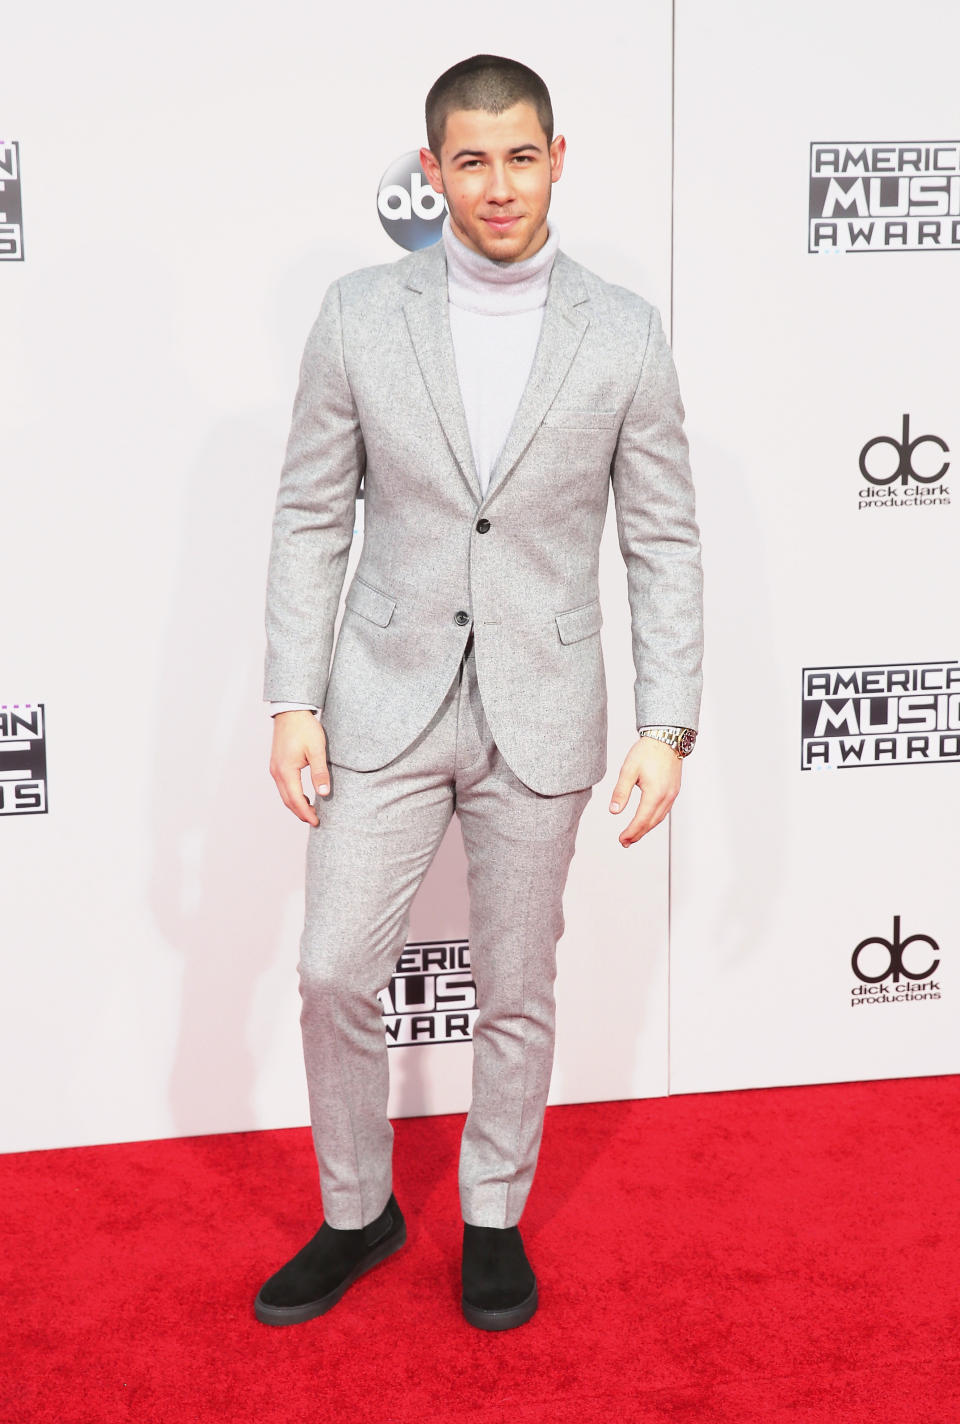 LOS ANGELES, CA - NOVEMBER 22:  Singer Nick Jonas attends the 2015 American Music Awards at Microsoft Theater on November 22, 2015 in Los Angeles, California.  (Photo by Mark Davis/Getty Images)